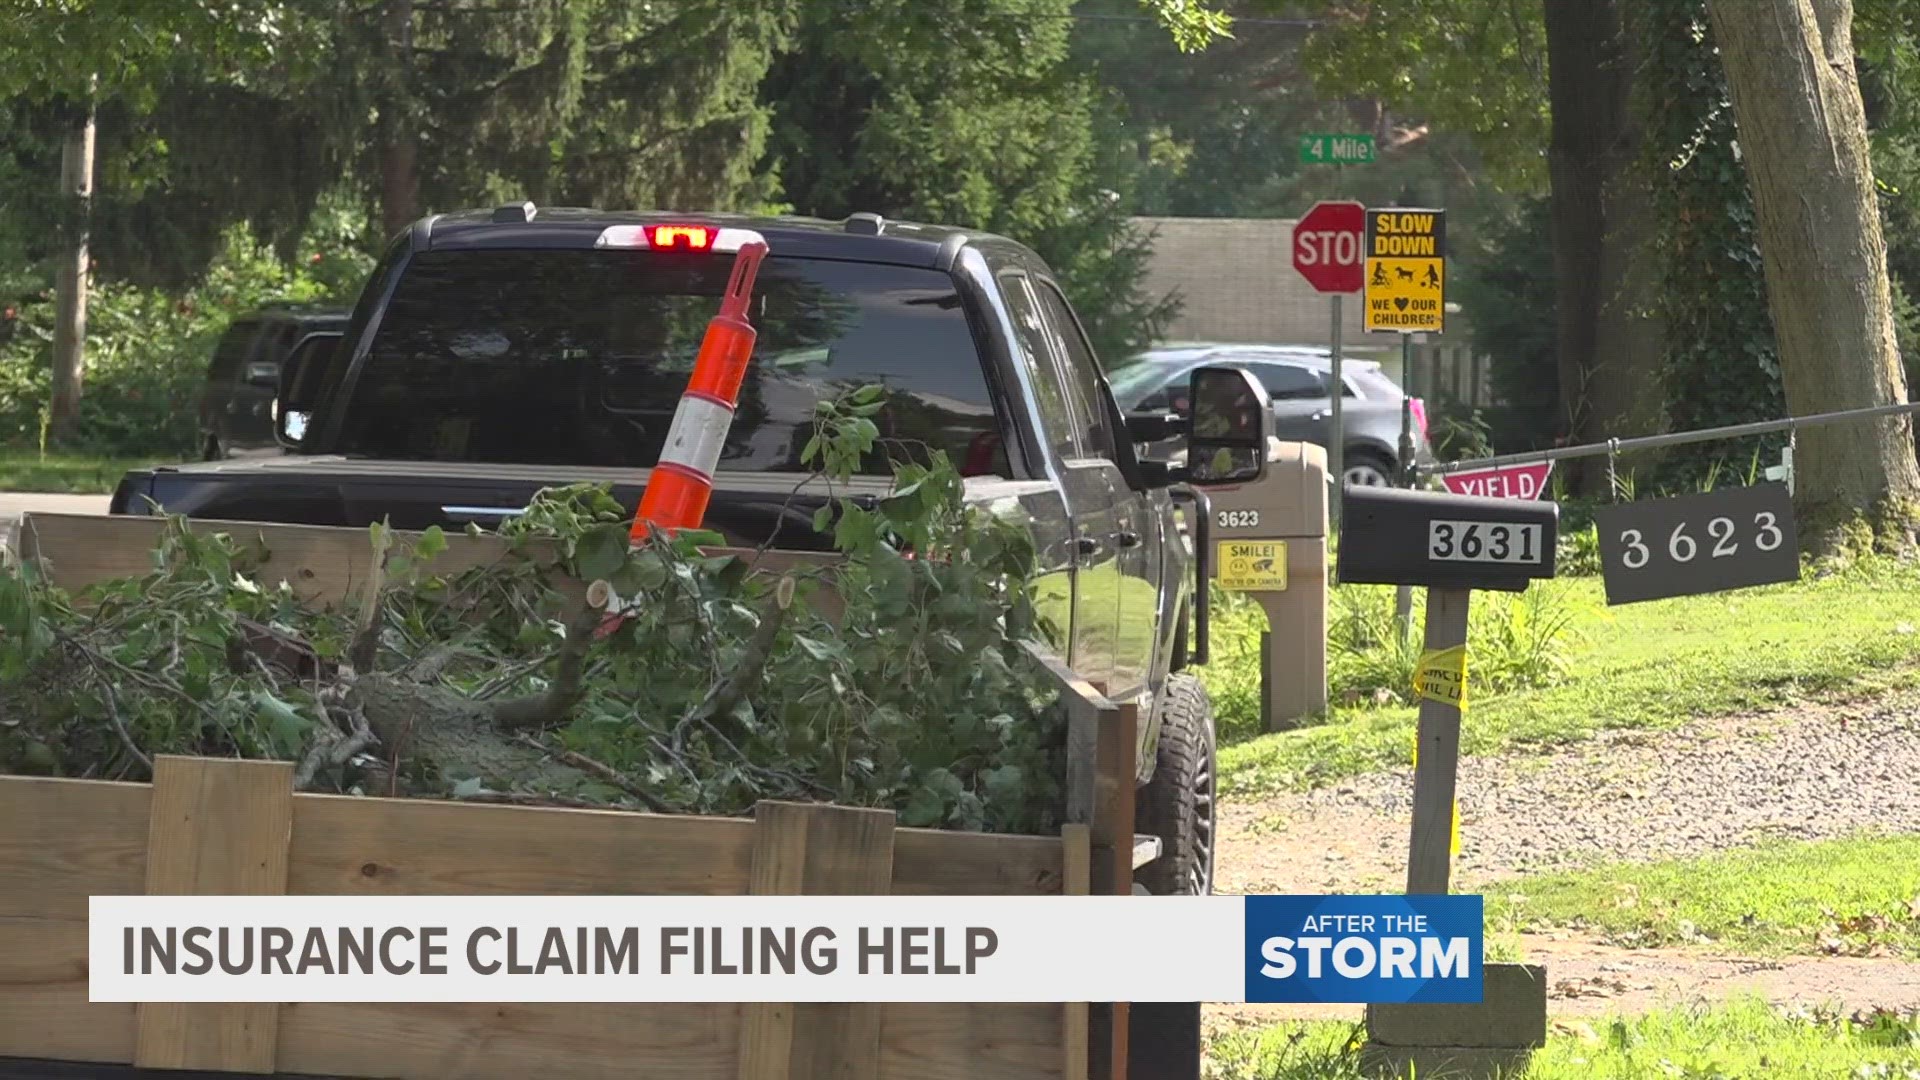 The recovery effort after the storms has also prompted a massive response from area businesses.